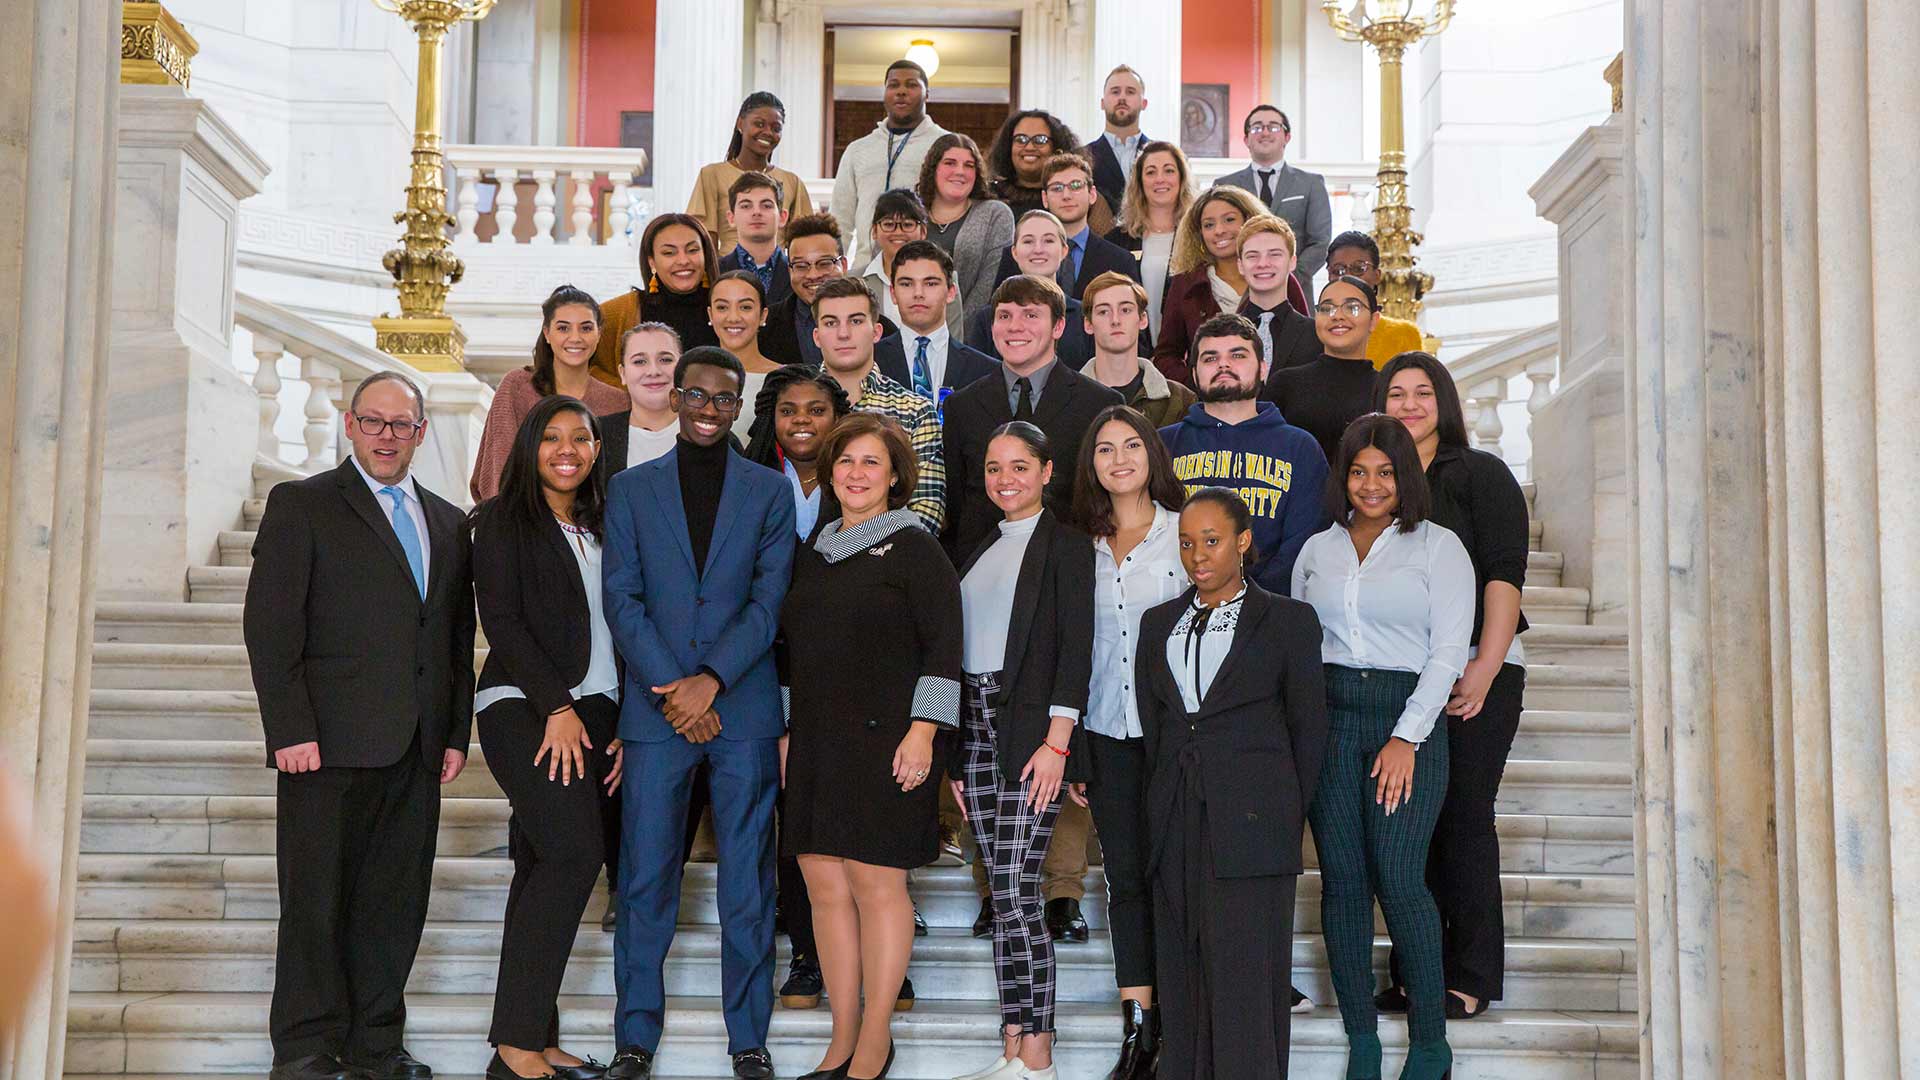 Students at the Rhode Island State House